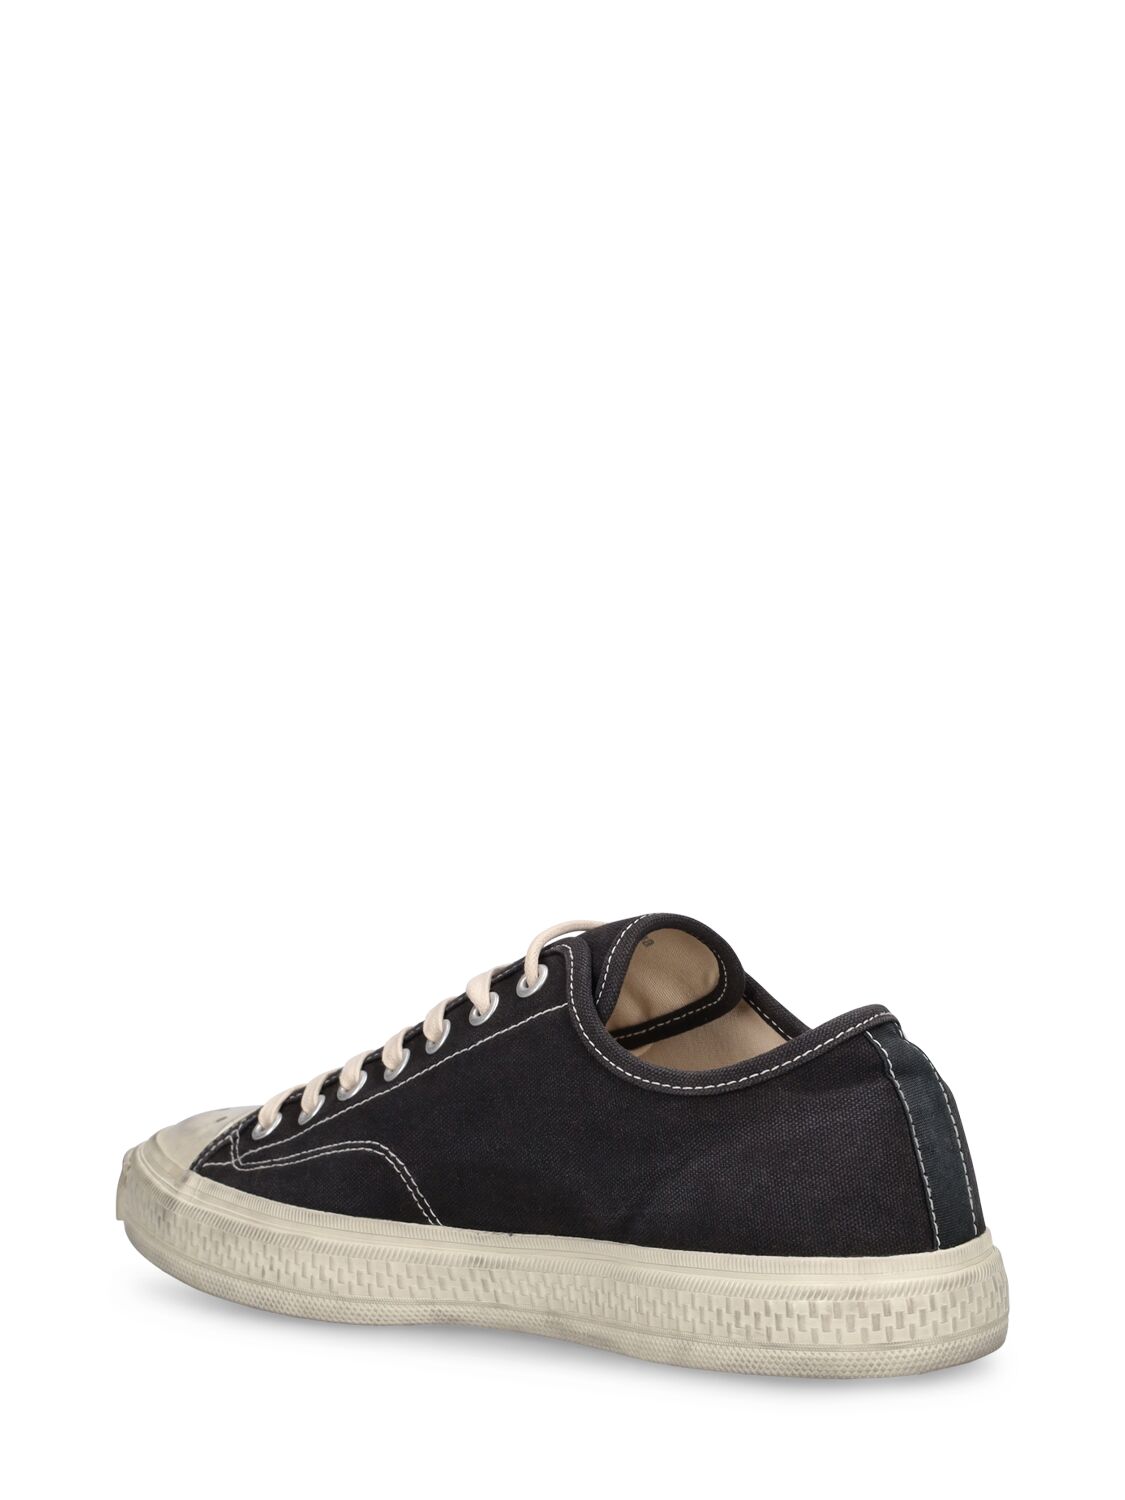 Shop Acne Studios Ballow Soft Tumbled Cotton Sneakers In Black,offwhite